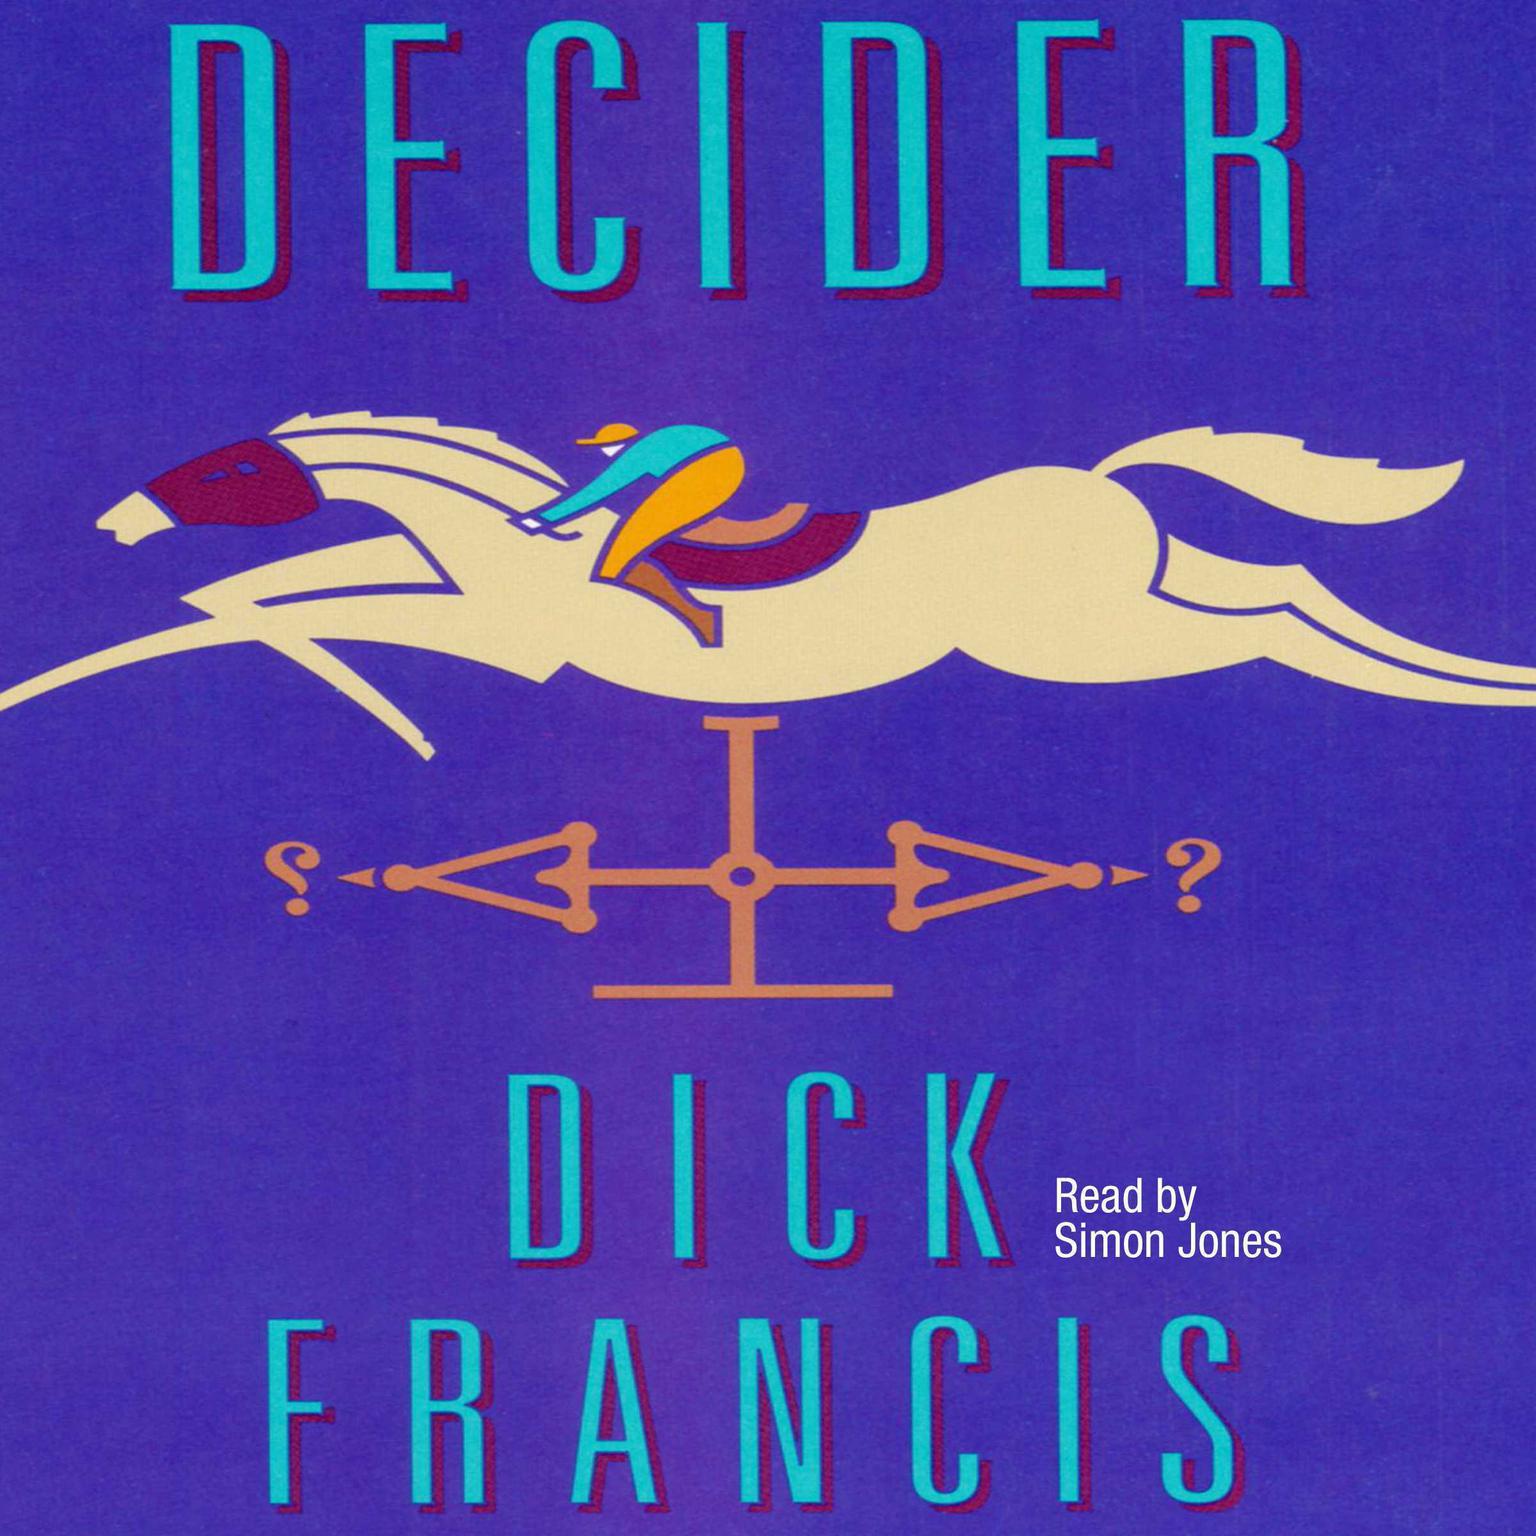 Decider (Abridged) Audiobook, by Dick Francis